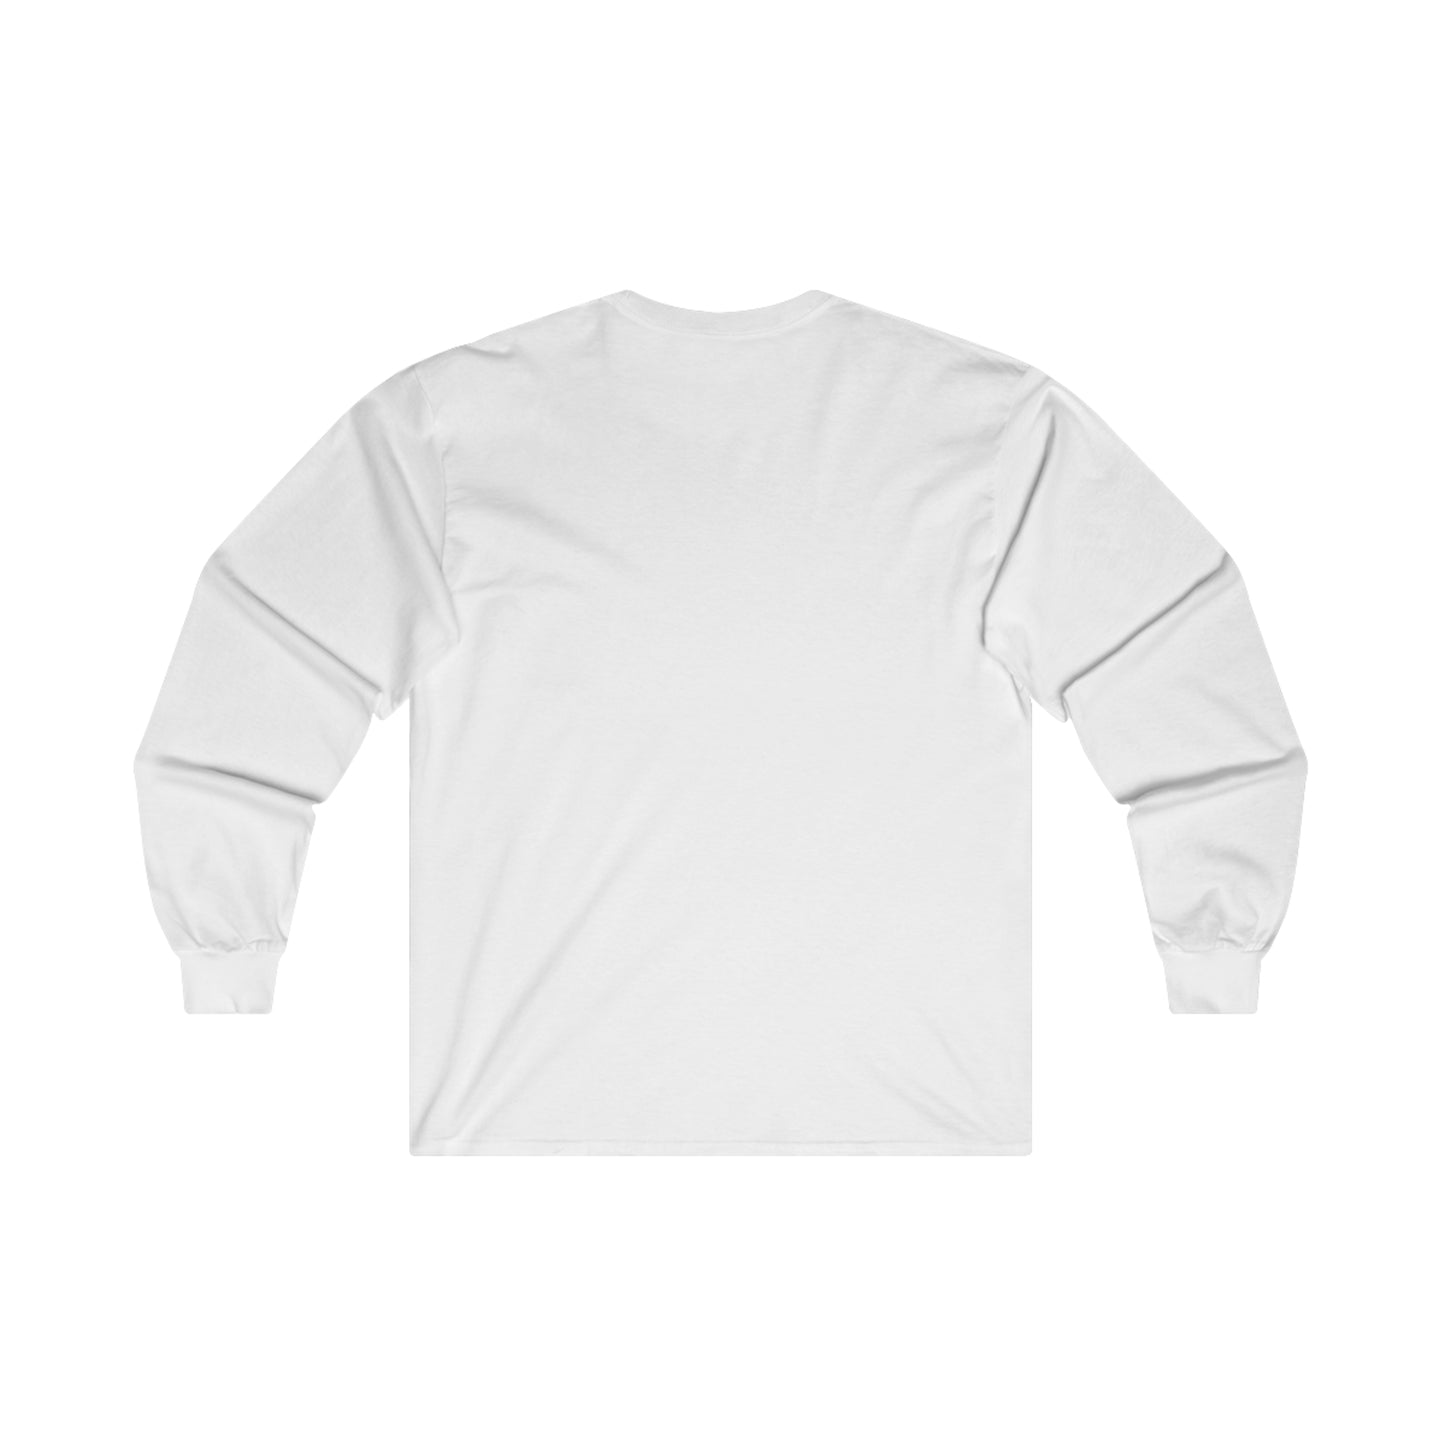 Abandoned & Forgotten Places "White Print" Long Sleeve Cotton T-Shirt